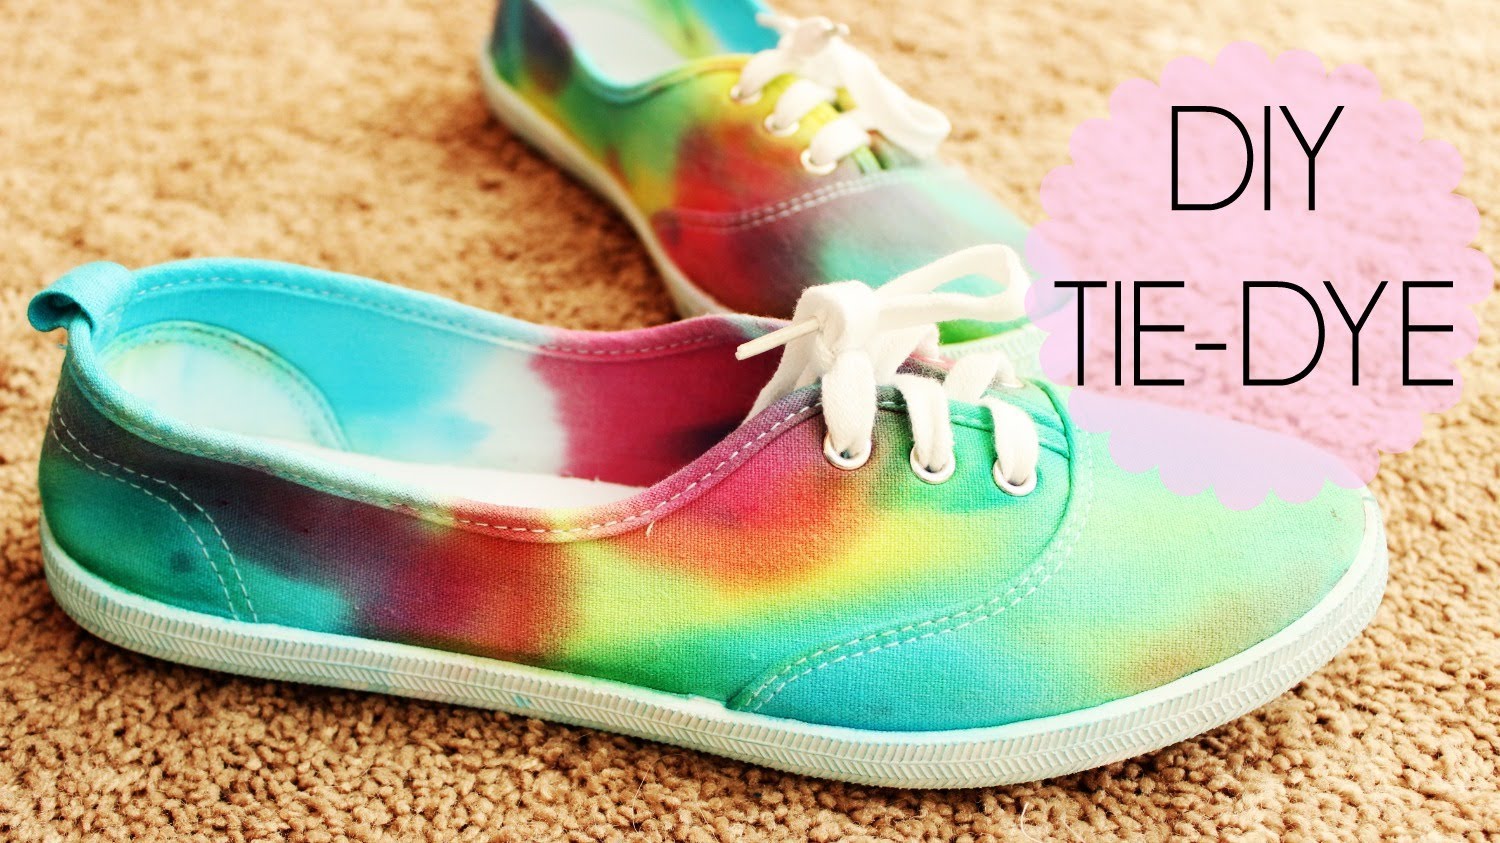 15 Different Things To Tie-Dye